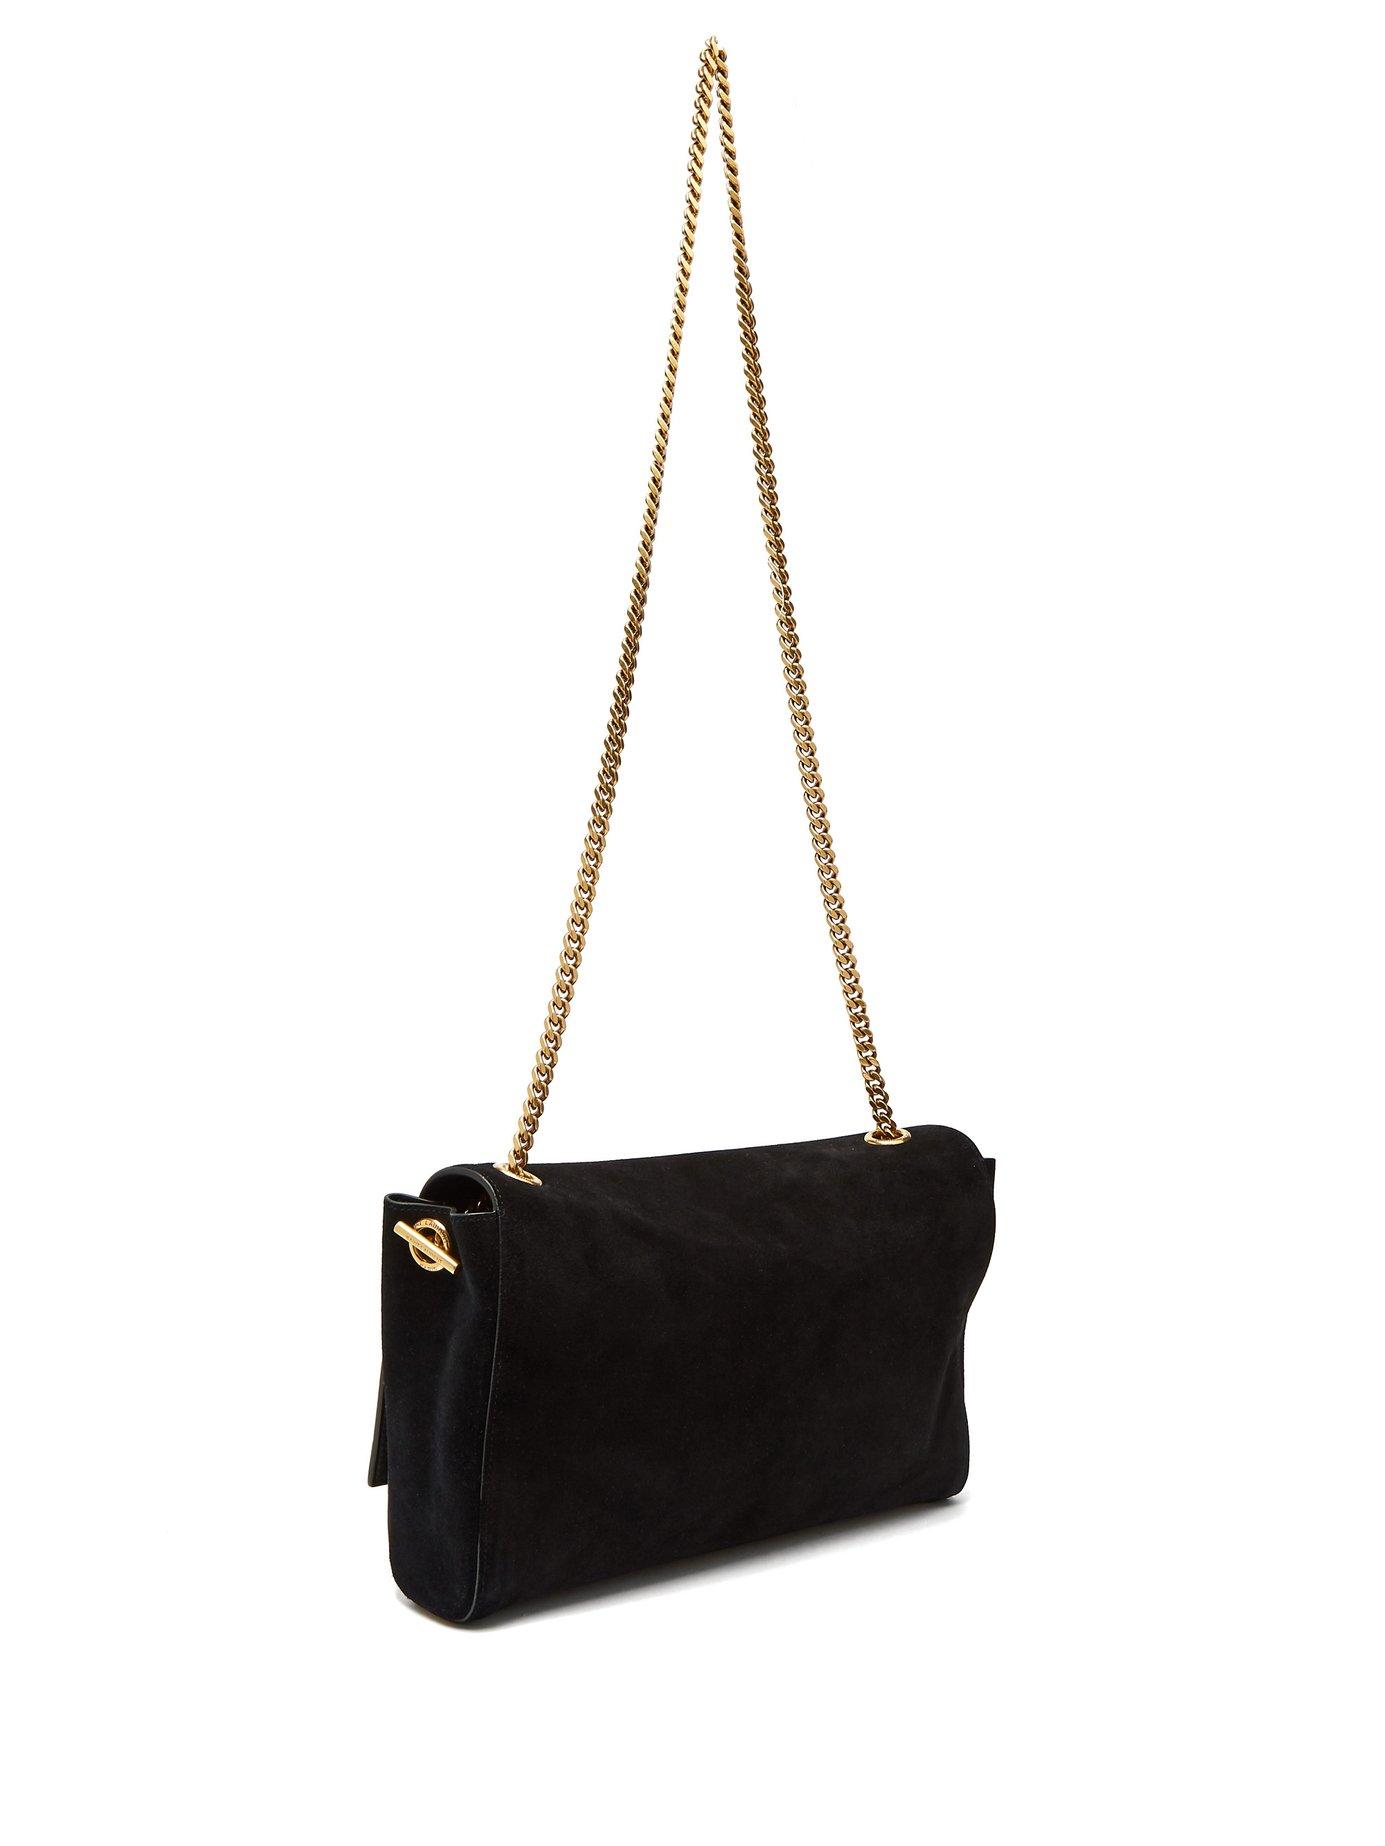 Saint Laurent Kate Medium Reversible Chain Bag In Suede And Shiny Leather